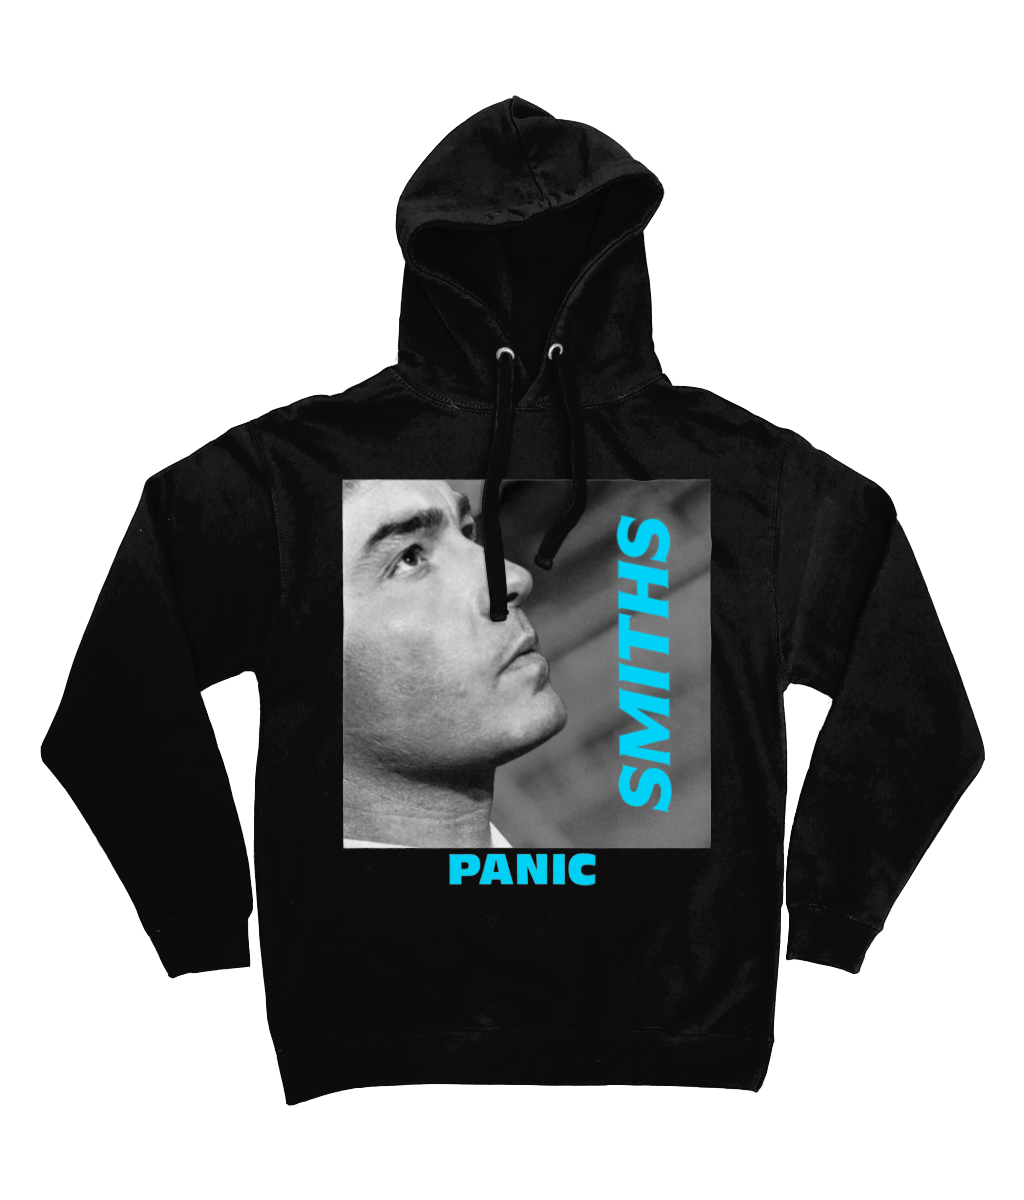 THE SMITHS - PANIC - 1986 - COULD LIFE EVER BE SANE AGAIN? - Hoodie